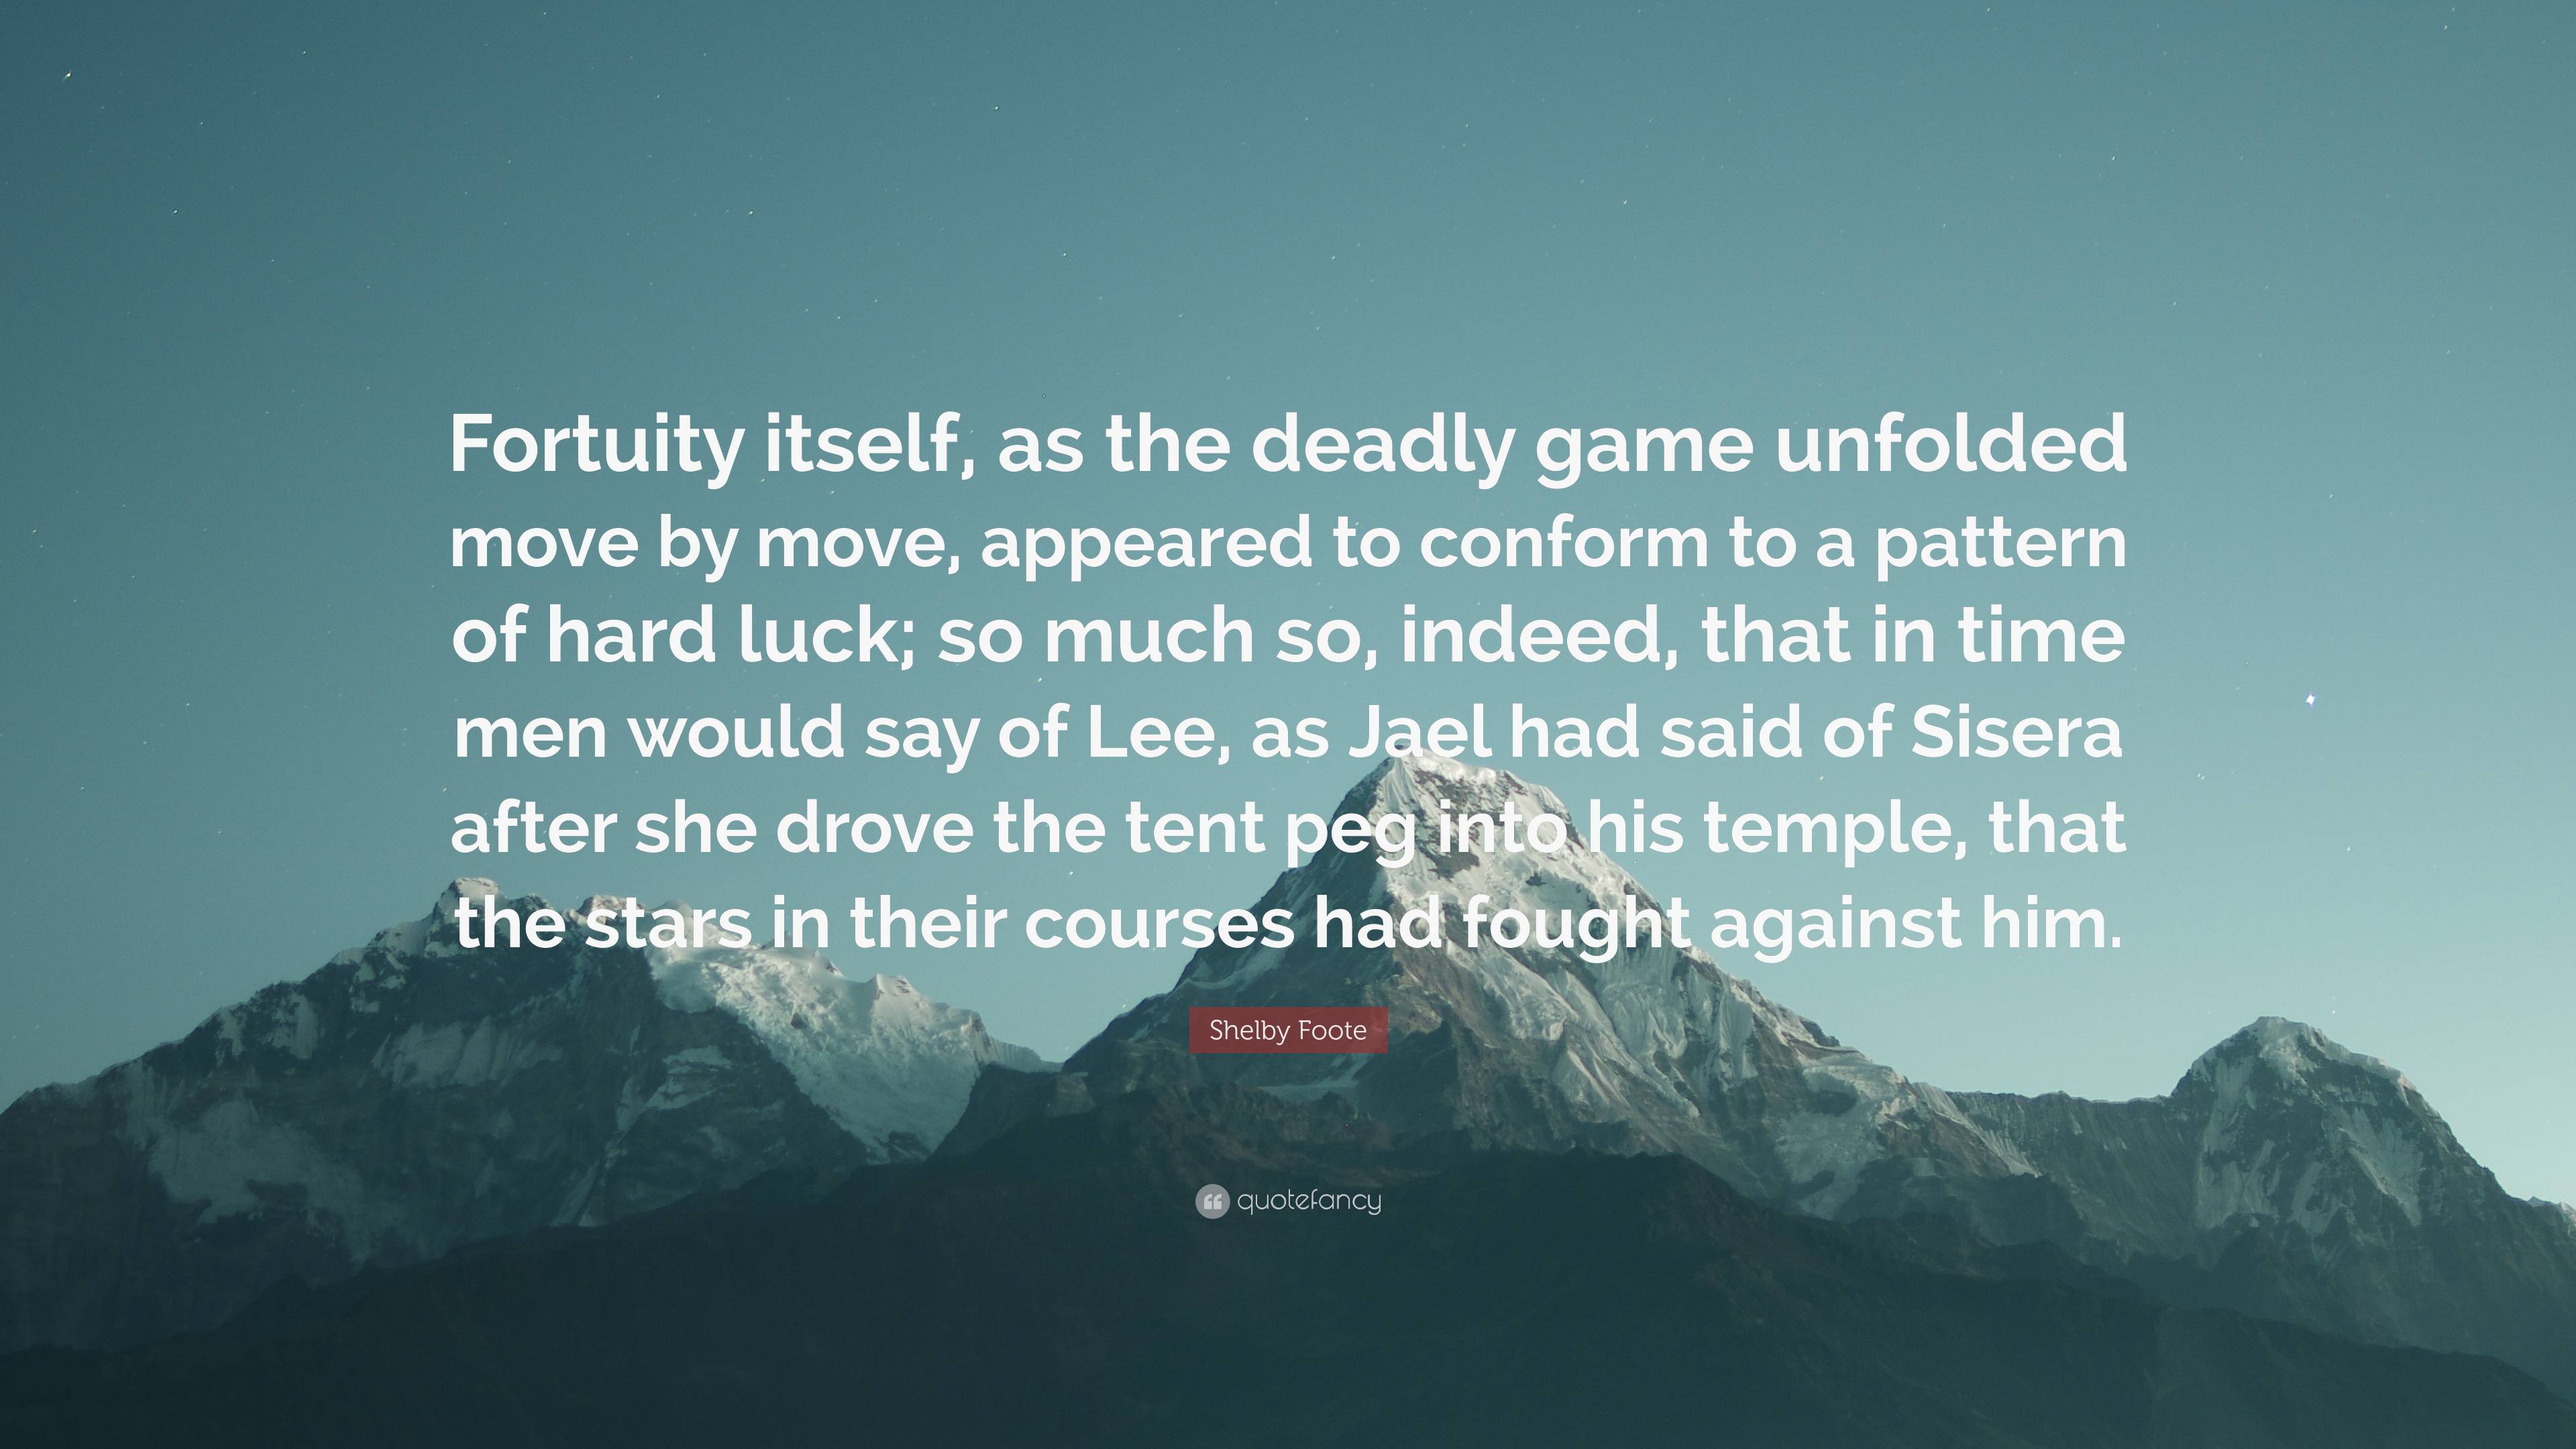 Shelby Foote Quote: “Fortuity itself, as the deadly game unfolded move by  move, appeared to conform to a pattern of hard luck; so much so, in...”